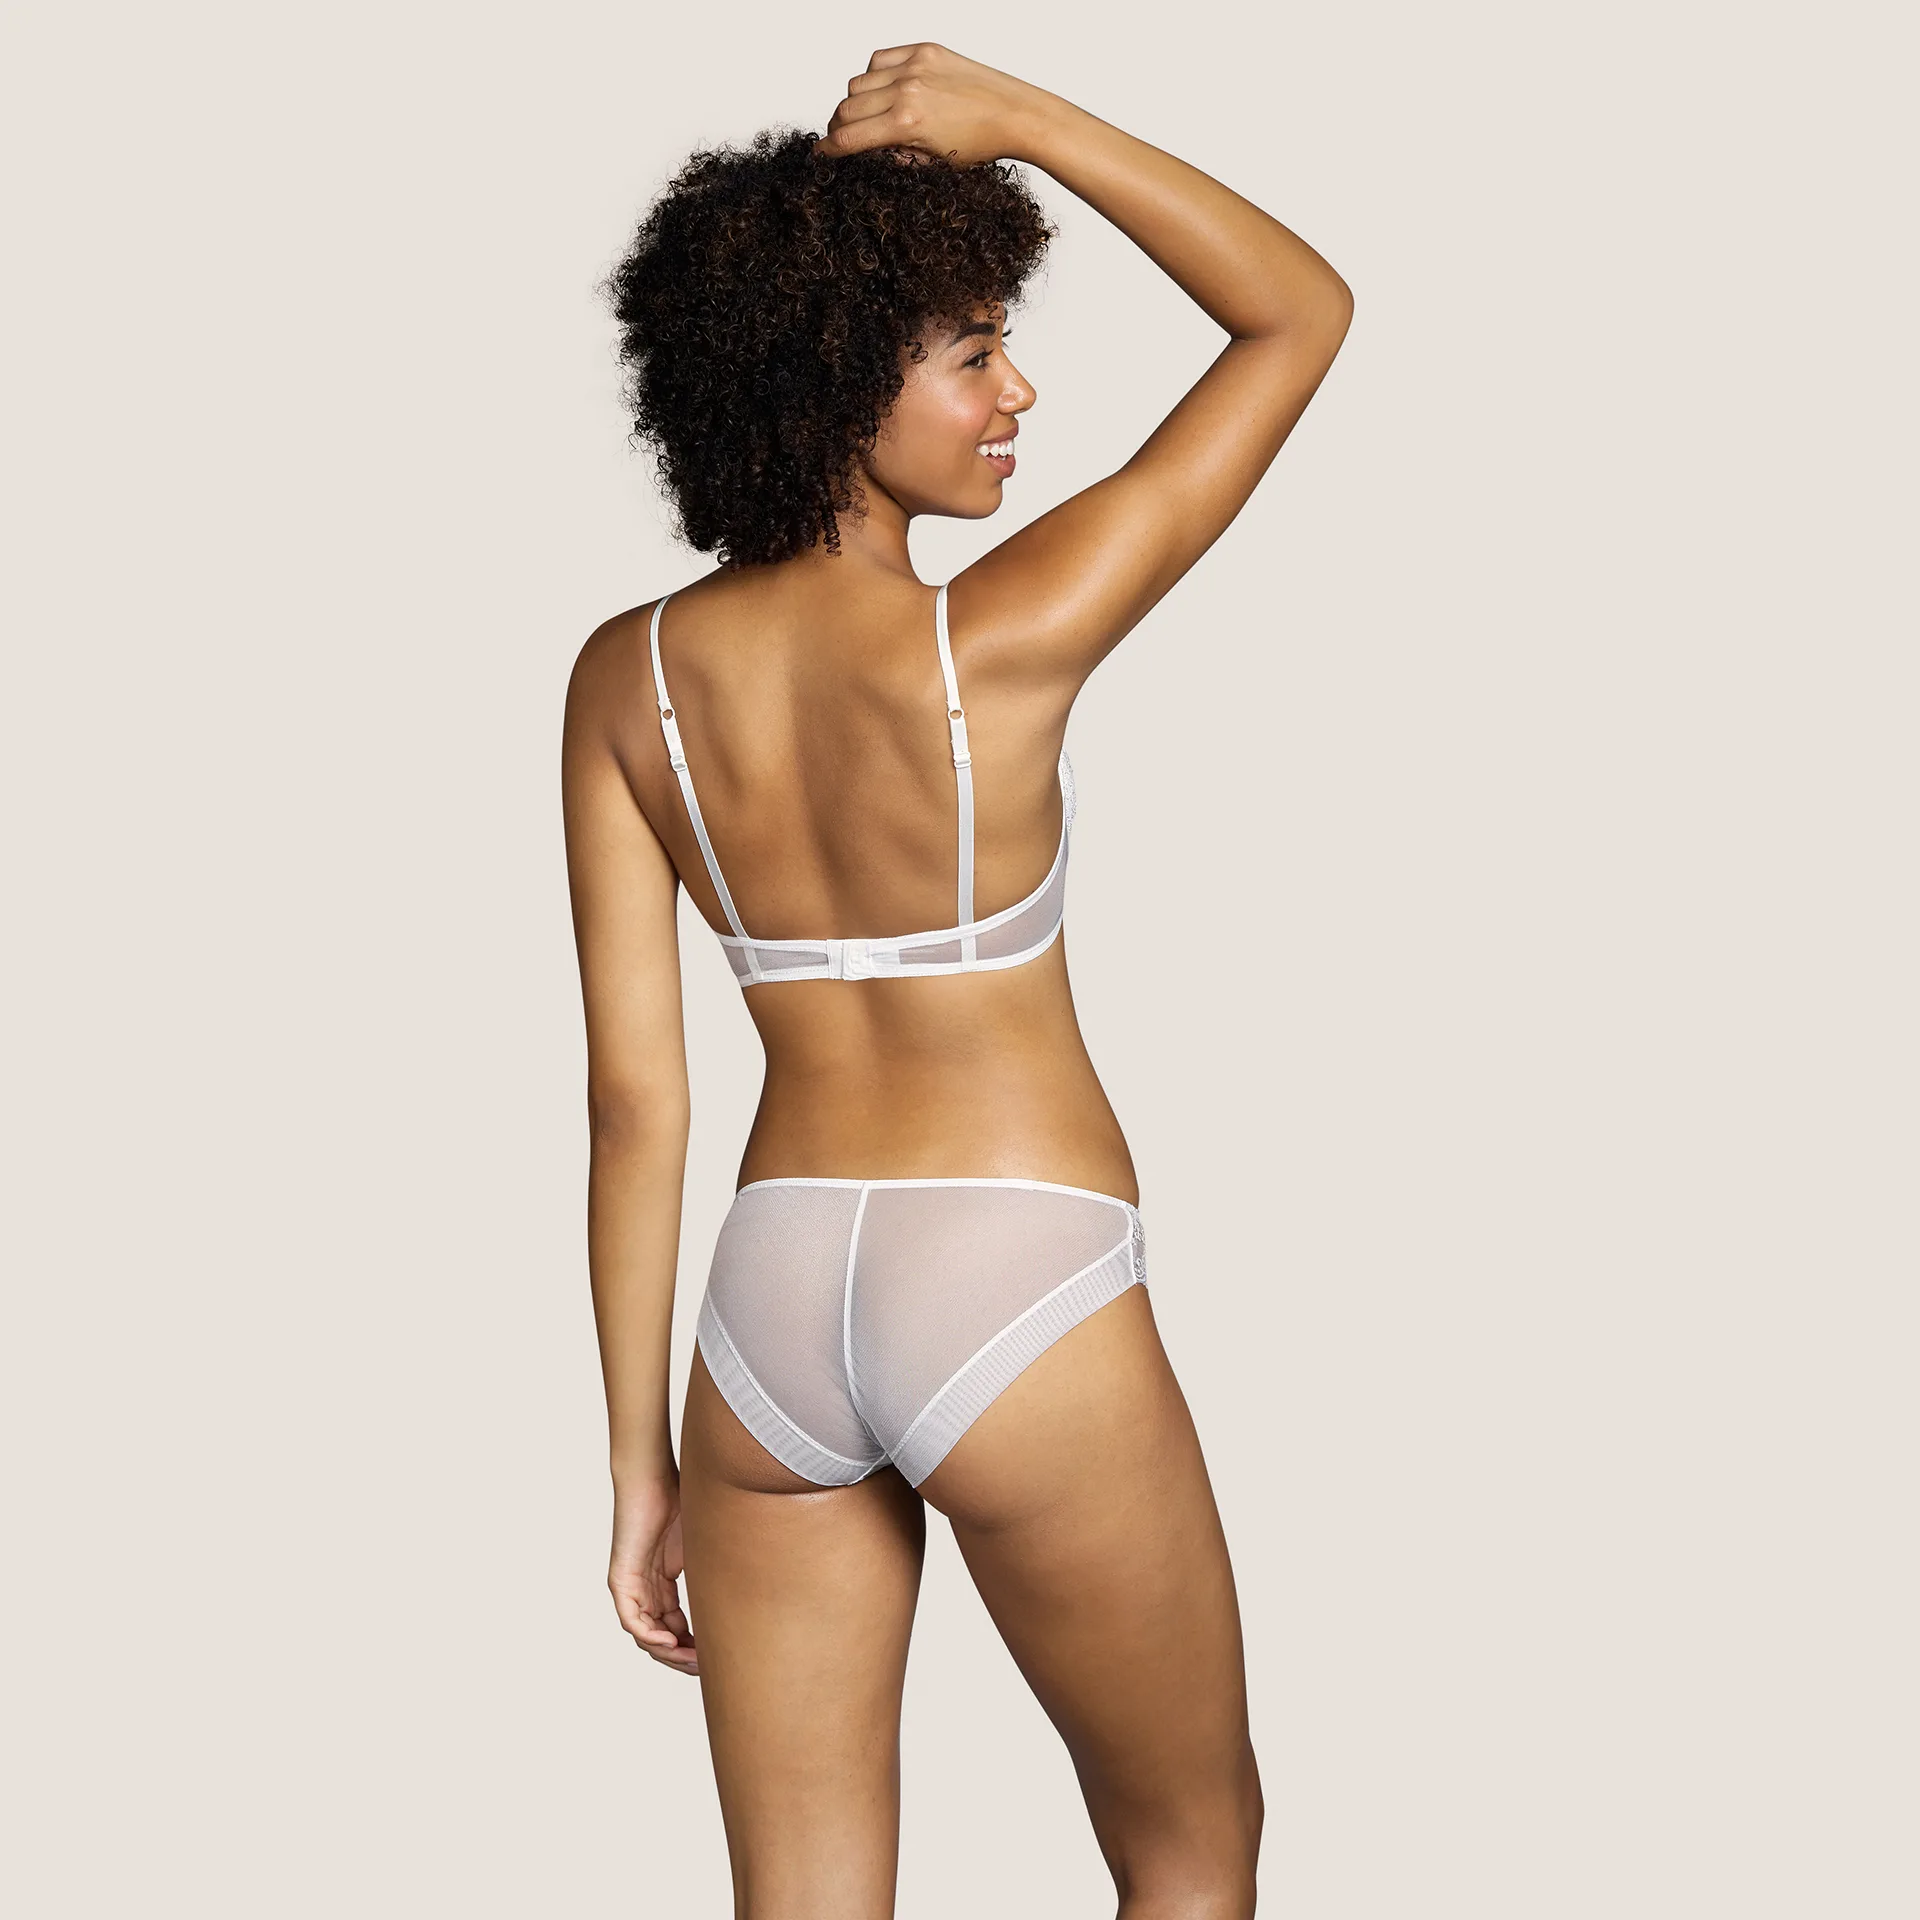 Salesbook image with head | Andres Sarda